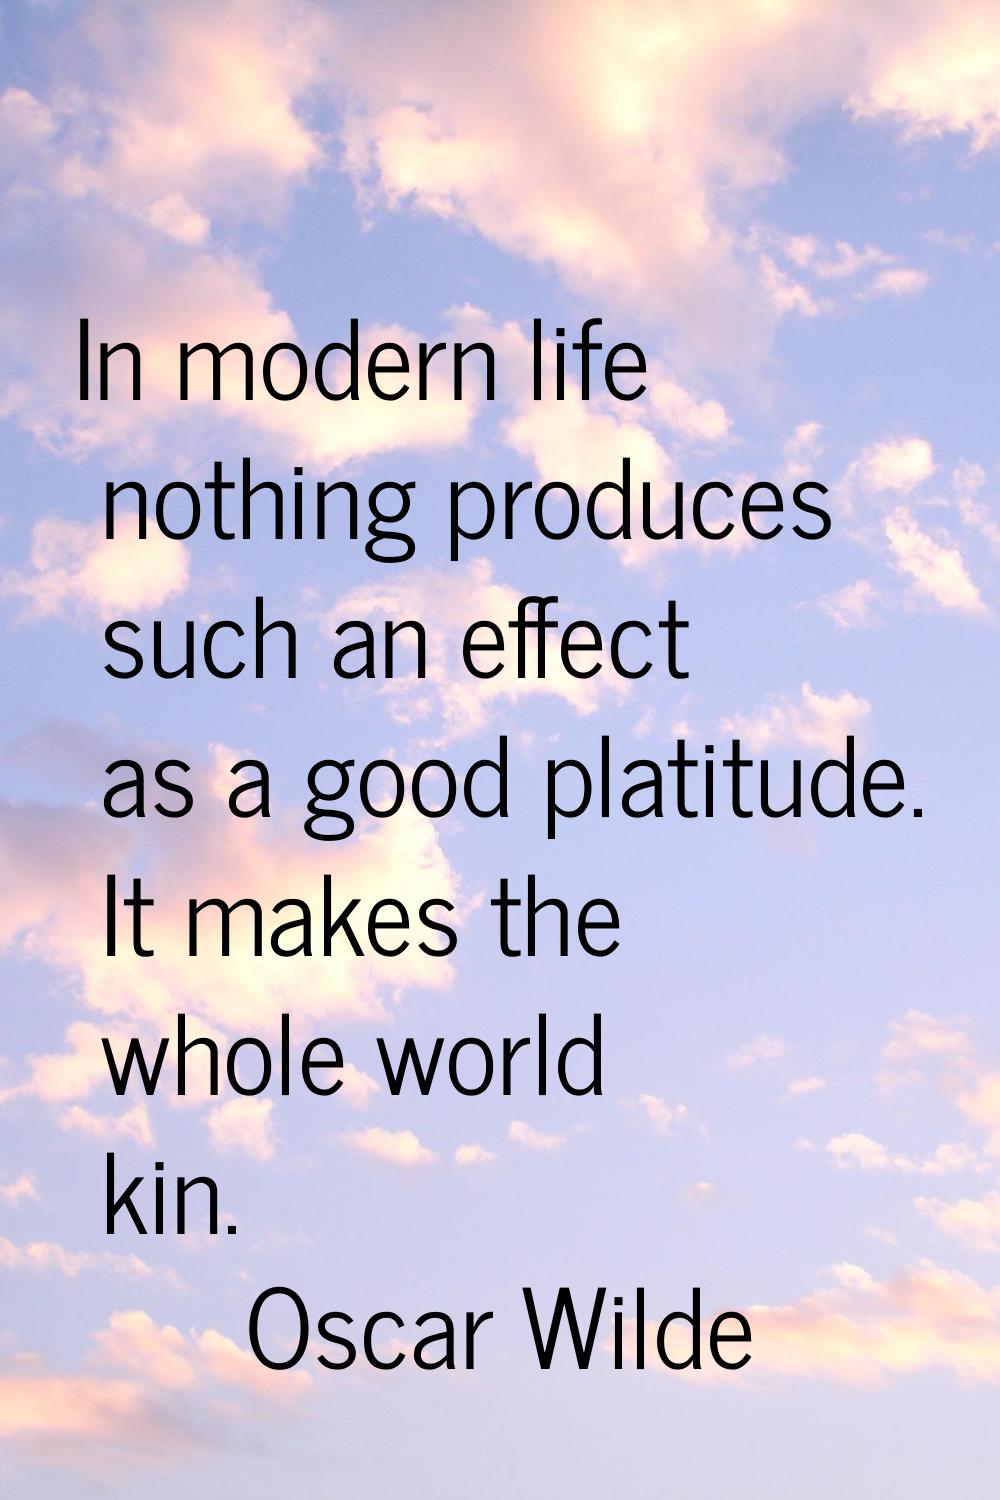 In modern life nothing produces such an effect as a good platitude. It makes the whole world kin.